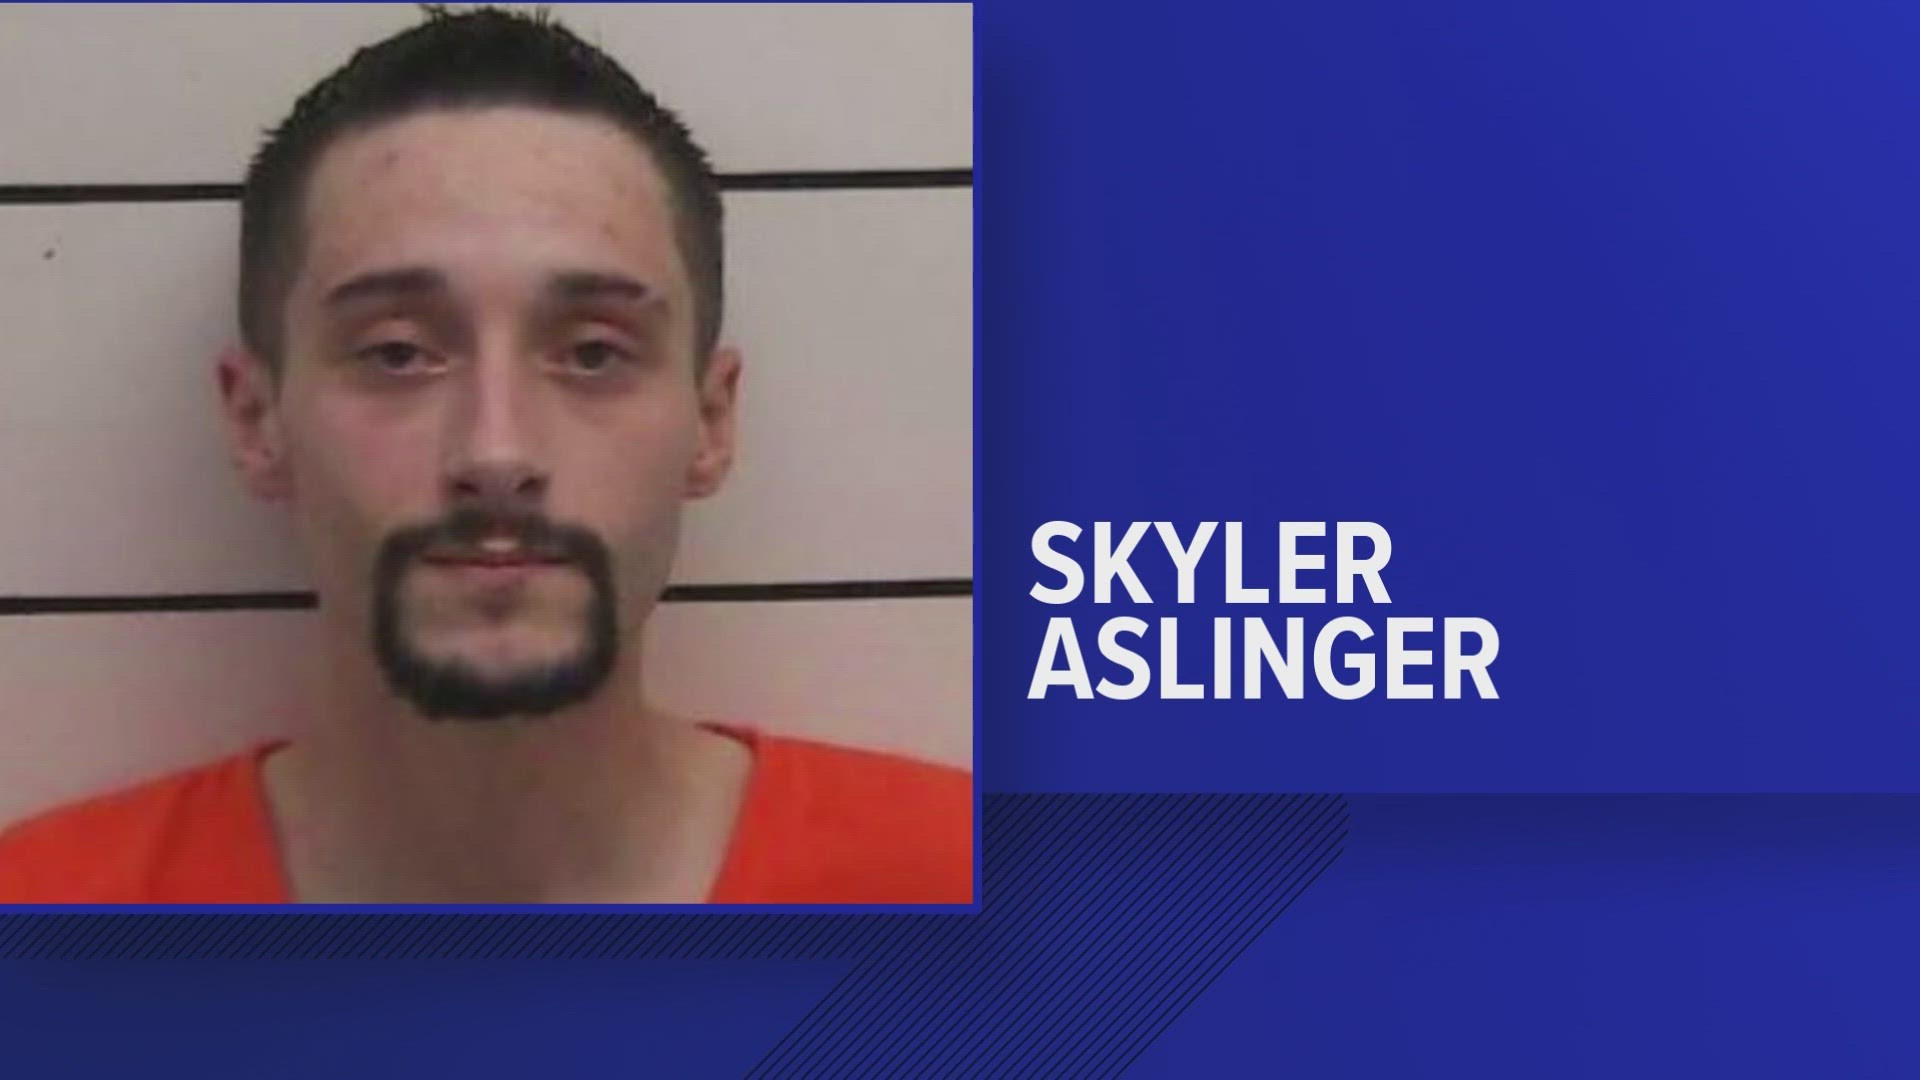 The Morgan County Sheriff's Office said Monday that Skyler Aslinger, 23, from Oliver Springs, was arrested on charges of vandalizing four churches.